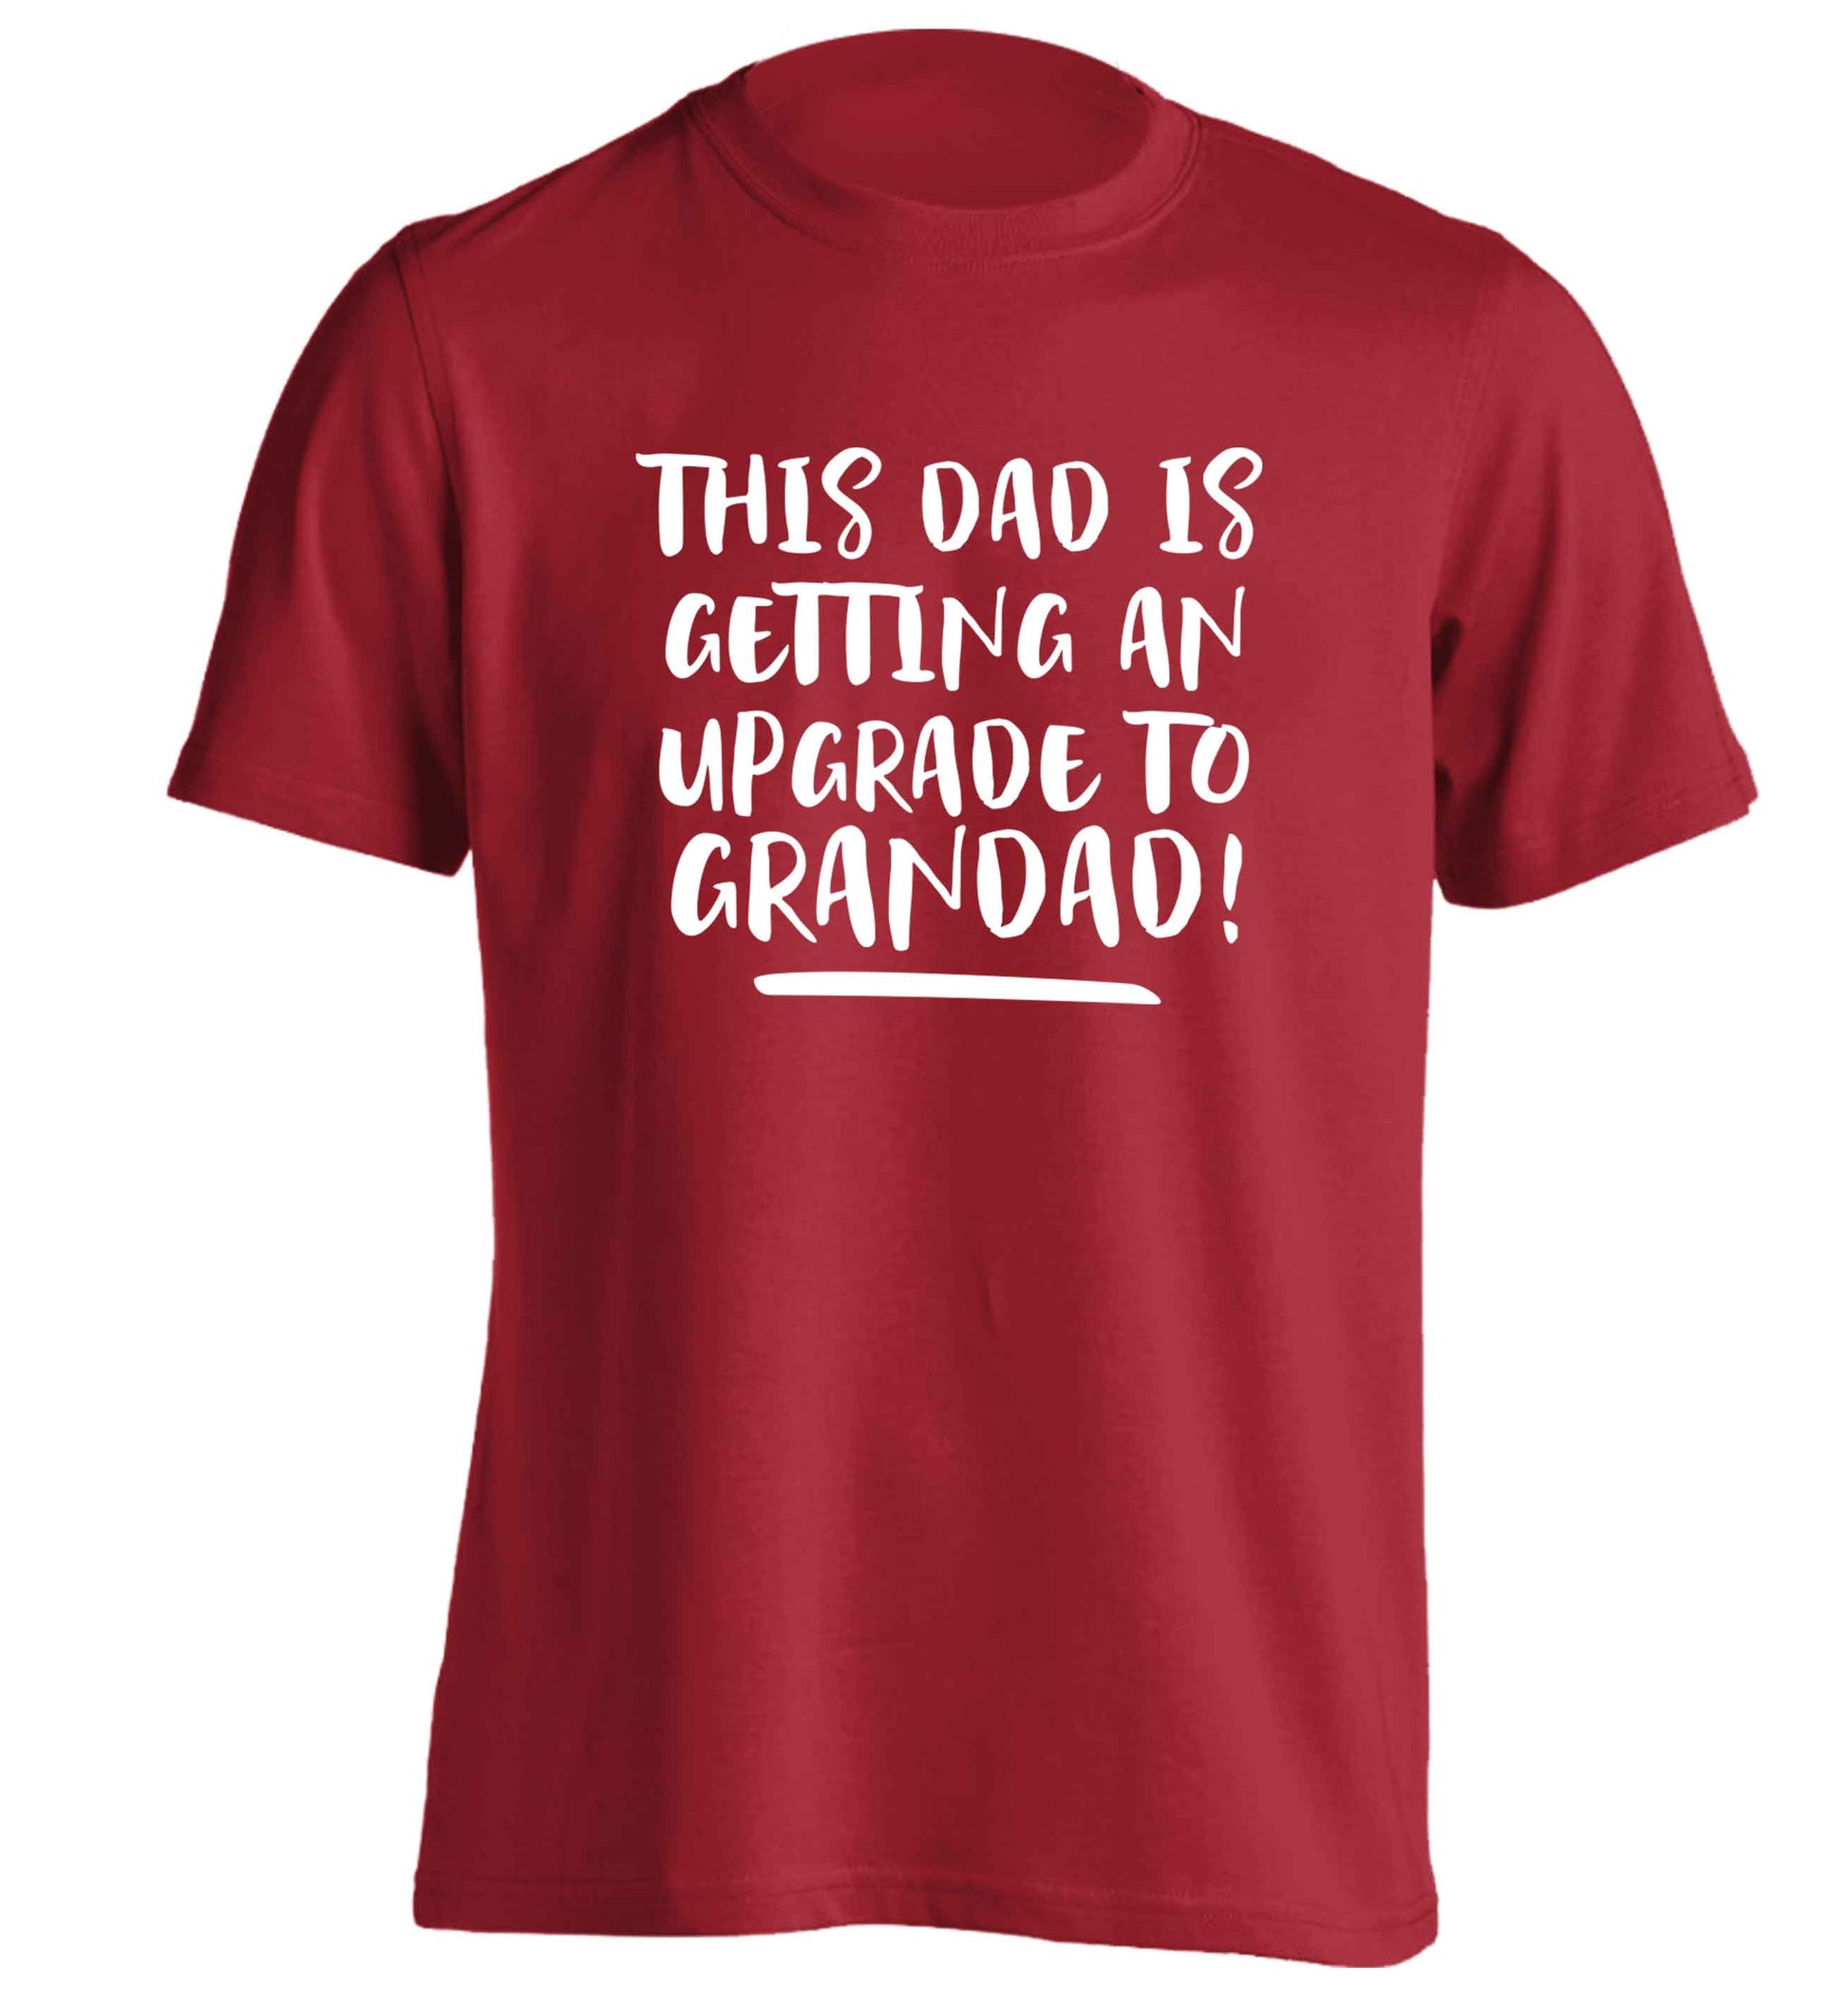 This dad is getting an upgrade to grandad! adults unisex red Tshirt 2XL